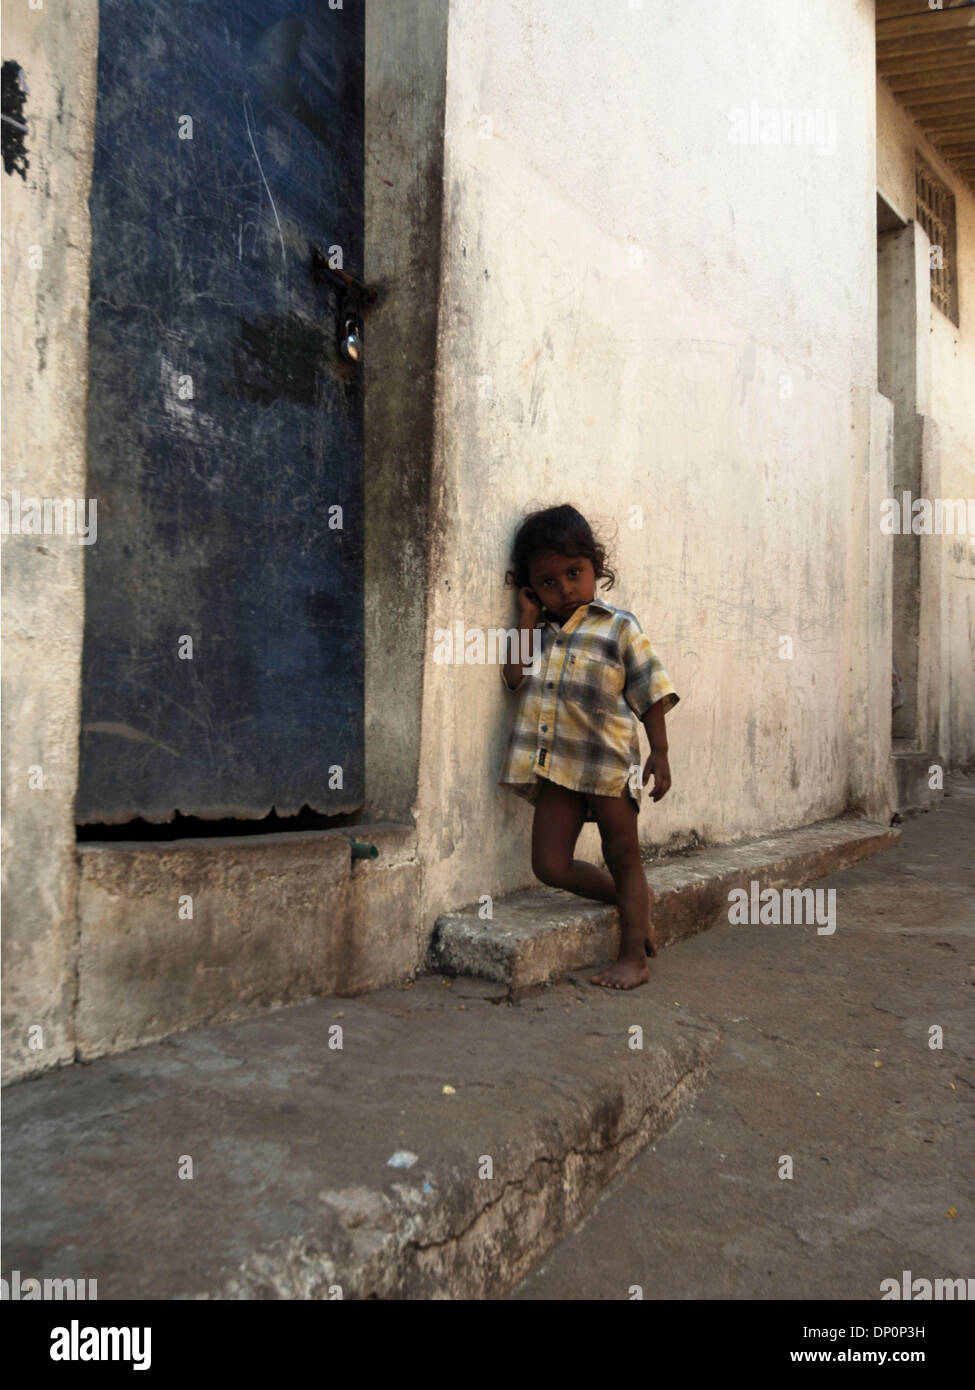 Mar 31, 2006; Chennai, Tamil Nadu, INDIA; Indian child hanging out infront of her house, which is located on the Adyar river. The Adyar river is where all  the raw sewage seems to run to. Mandatory Credit: Photo by Daniel Wilkinson/Daniel Wilkinson. (©) Copyright 2006 by Daniel Wilkinson Stock Photo